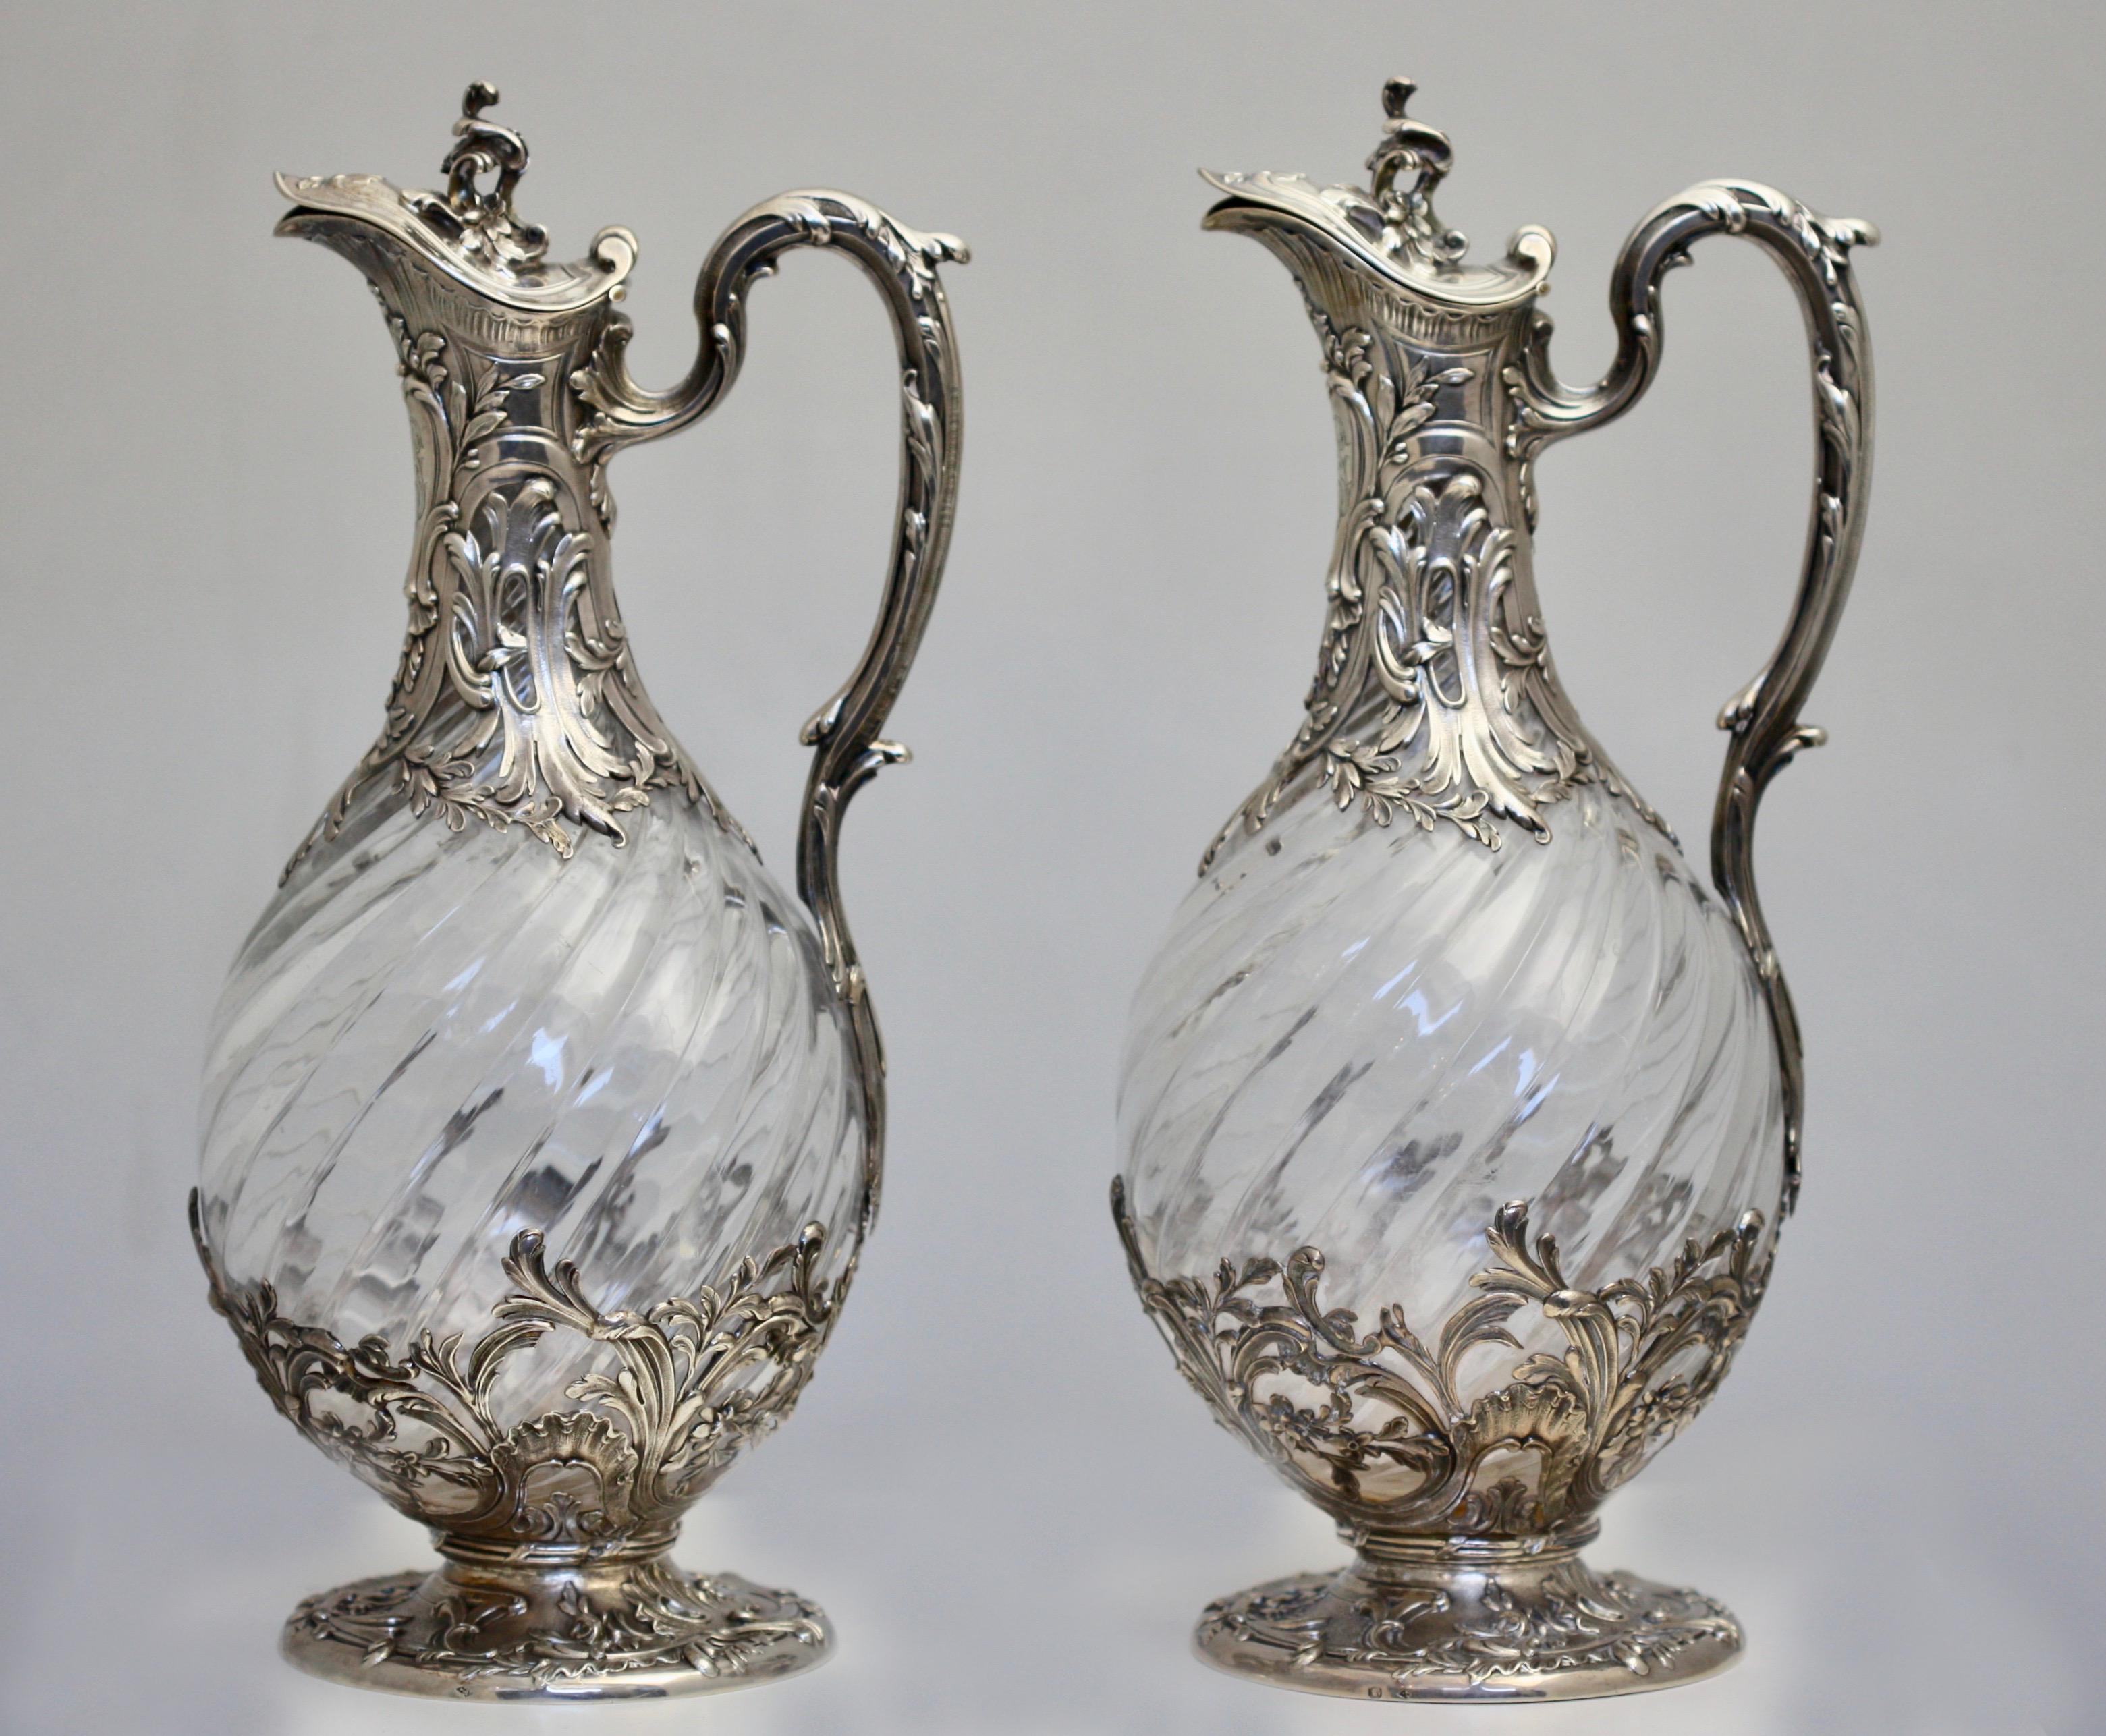 Late 19th Century Very Fine Pair of French Silver-Mounted Glass Claret Jugs, Paris, circa 1880 For Sale